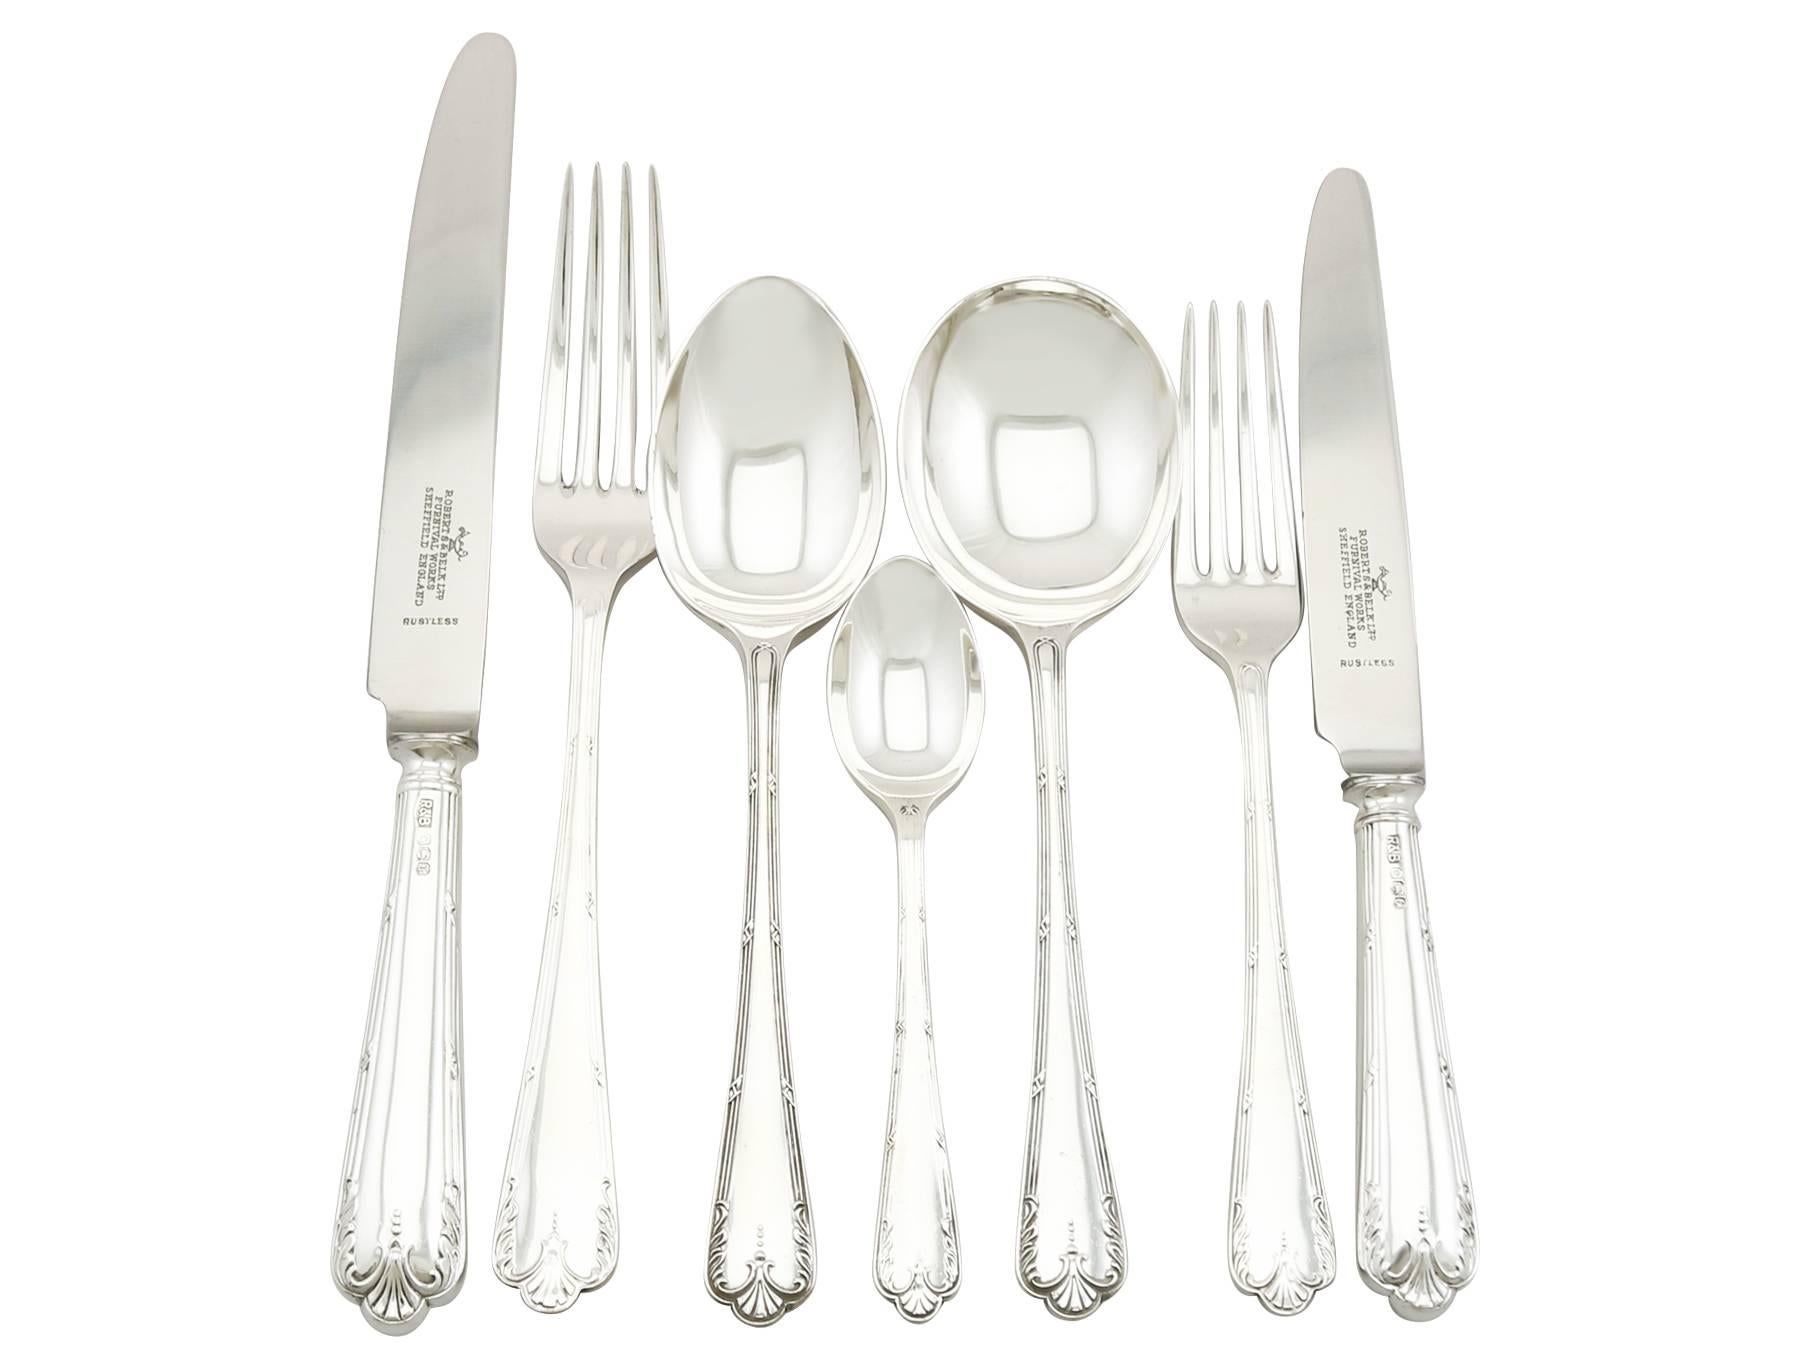 An exceptional, fine and impressive vintage Elizabeth II, English sterling silver straight Louis Seize pattern canteen of cutlery for twelve persons; an addition to our antique flatware sets.

The pieces of this exceptional vintage straight